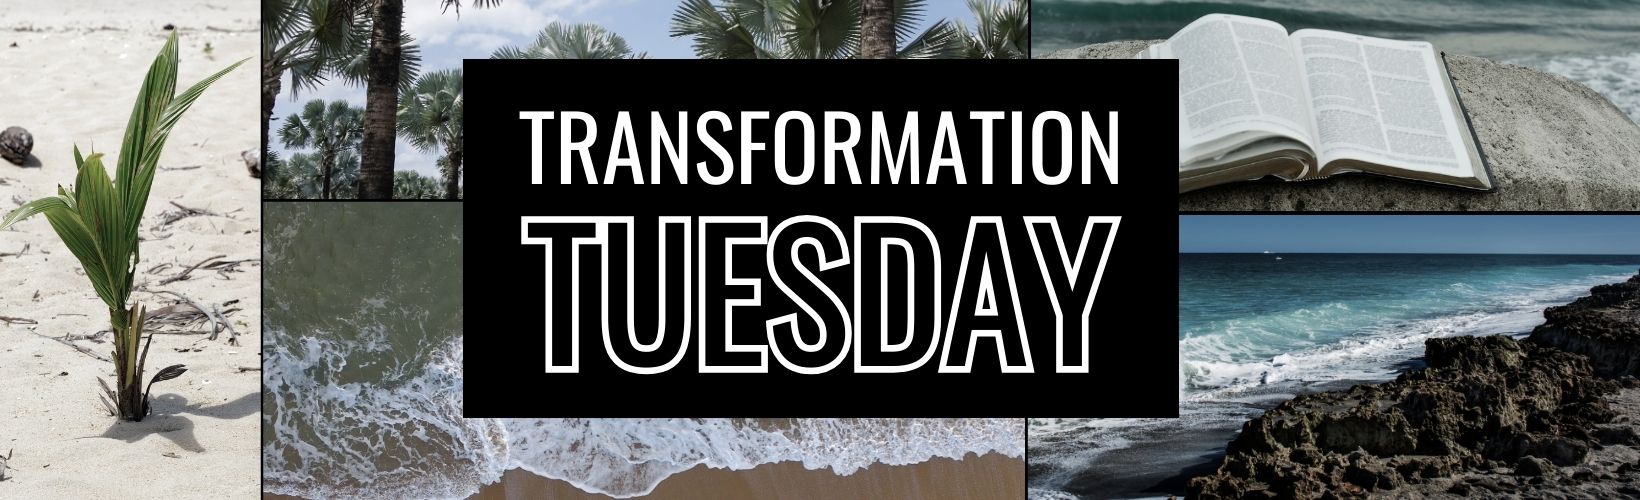 Transformation Tuesday: Transform Your Environment for a Better You